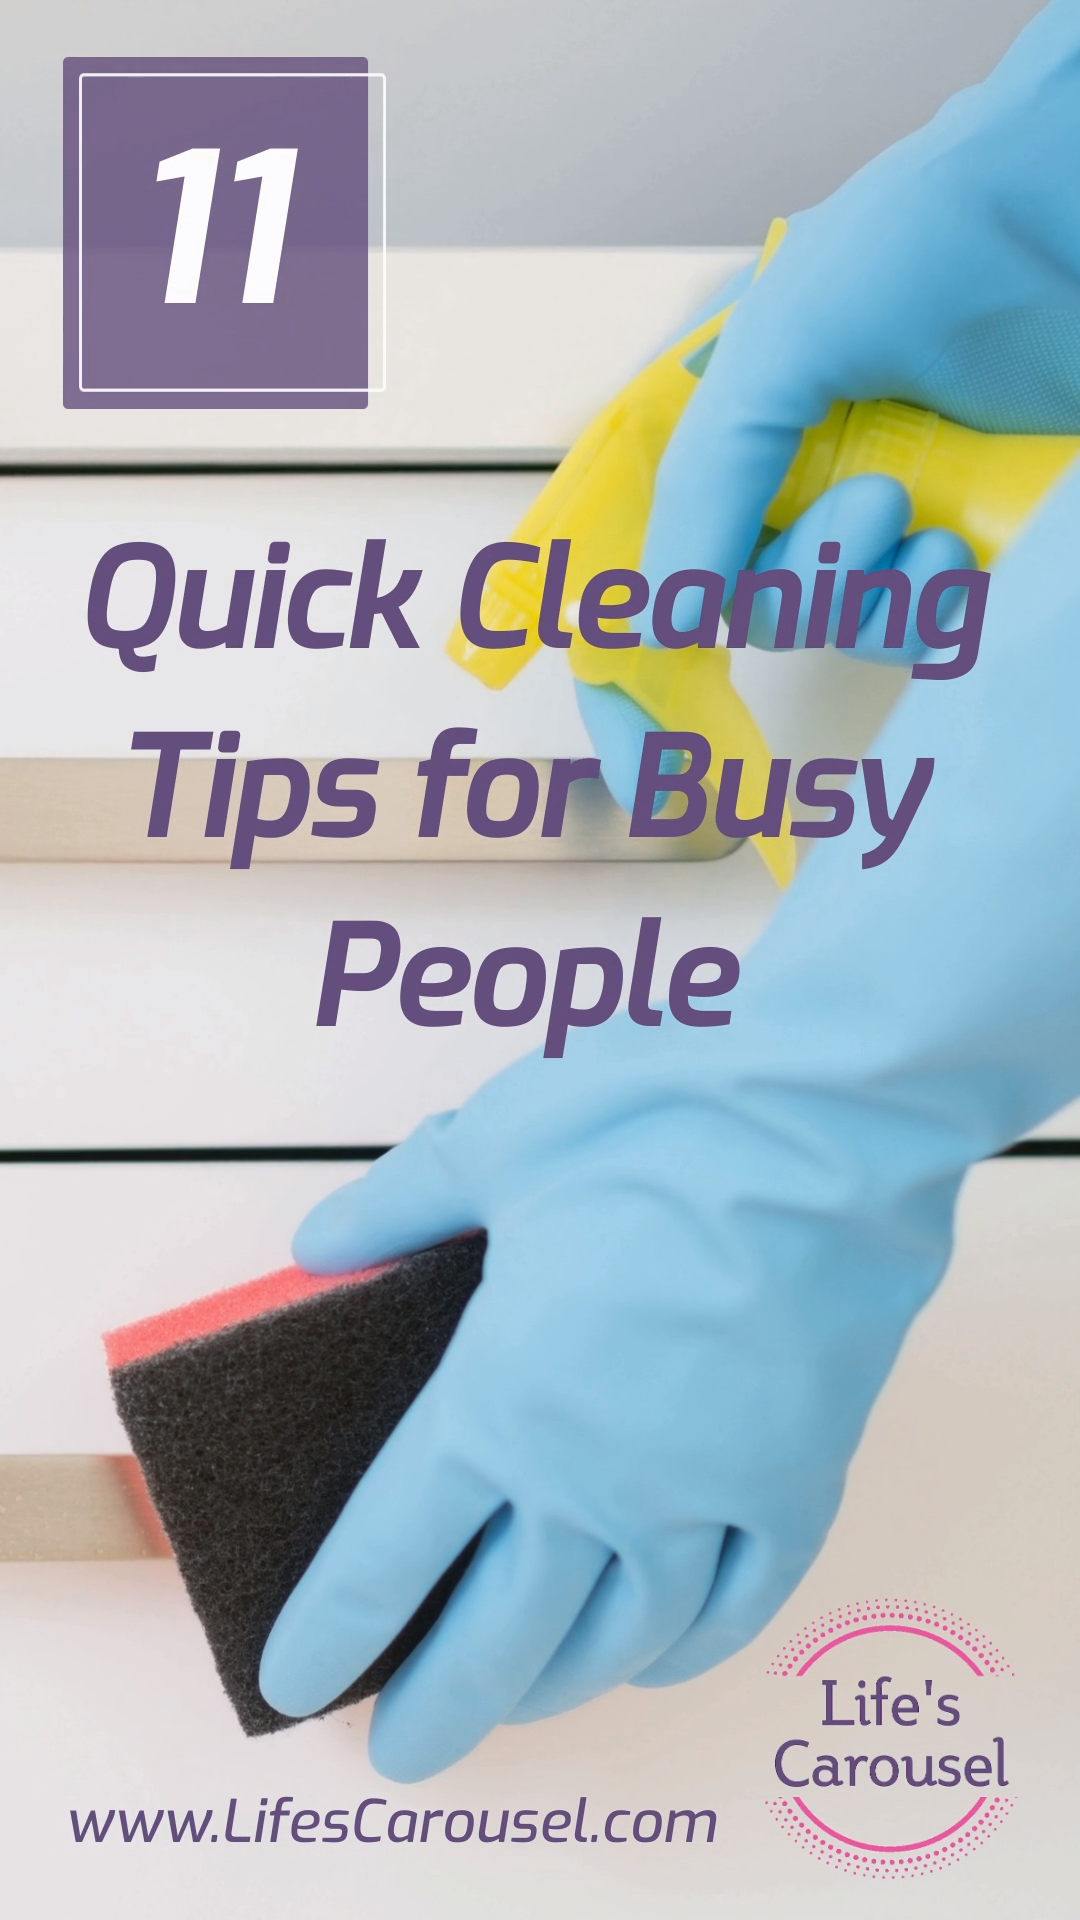 11 Quick Cleaning Tips (#2 is Great!) - 11 Quick Cleaning Tips (#2 is Great!) -   17 diy House hacks ideas